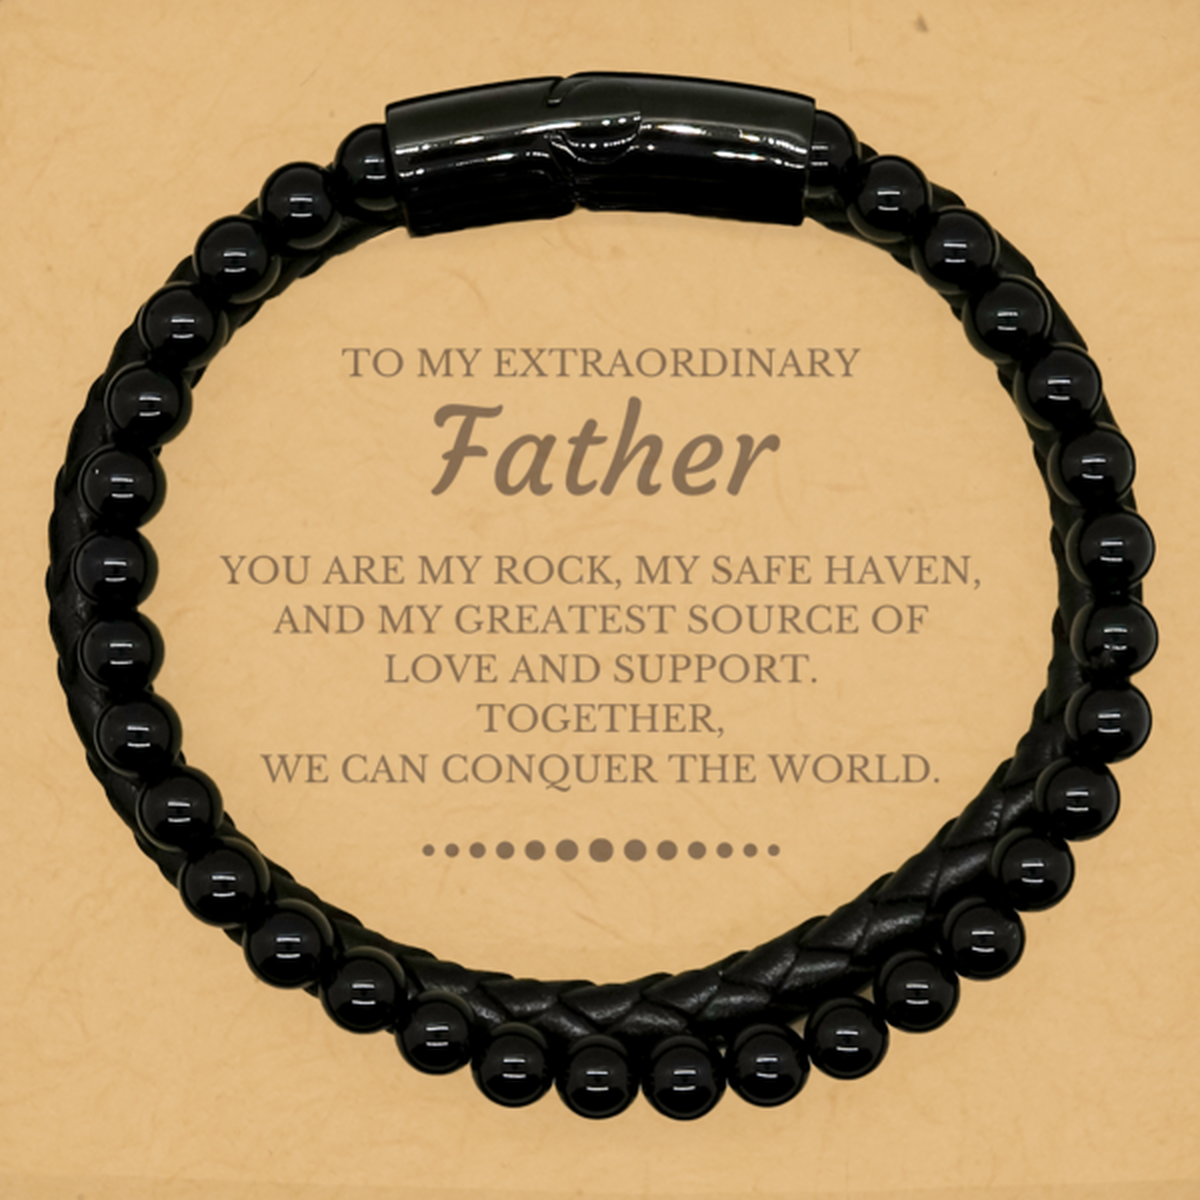 To My Extraordinary Father Gifts, Together, we can conquer the world, Birthday Stone Leather Bracelets For Father, Christmas Gifts For Father